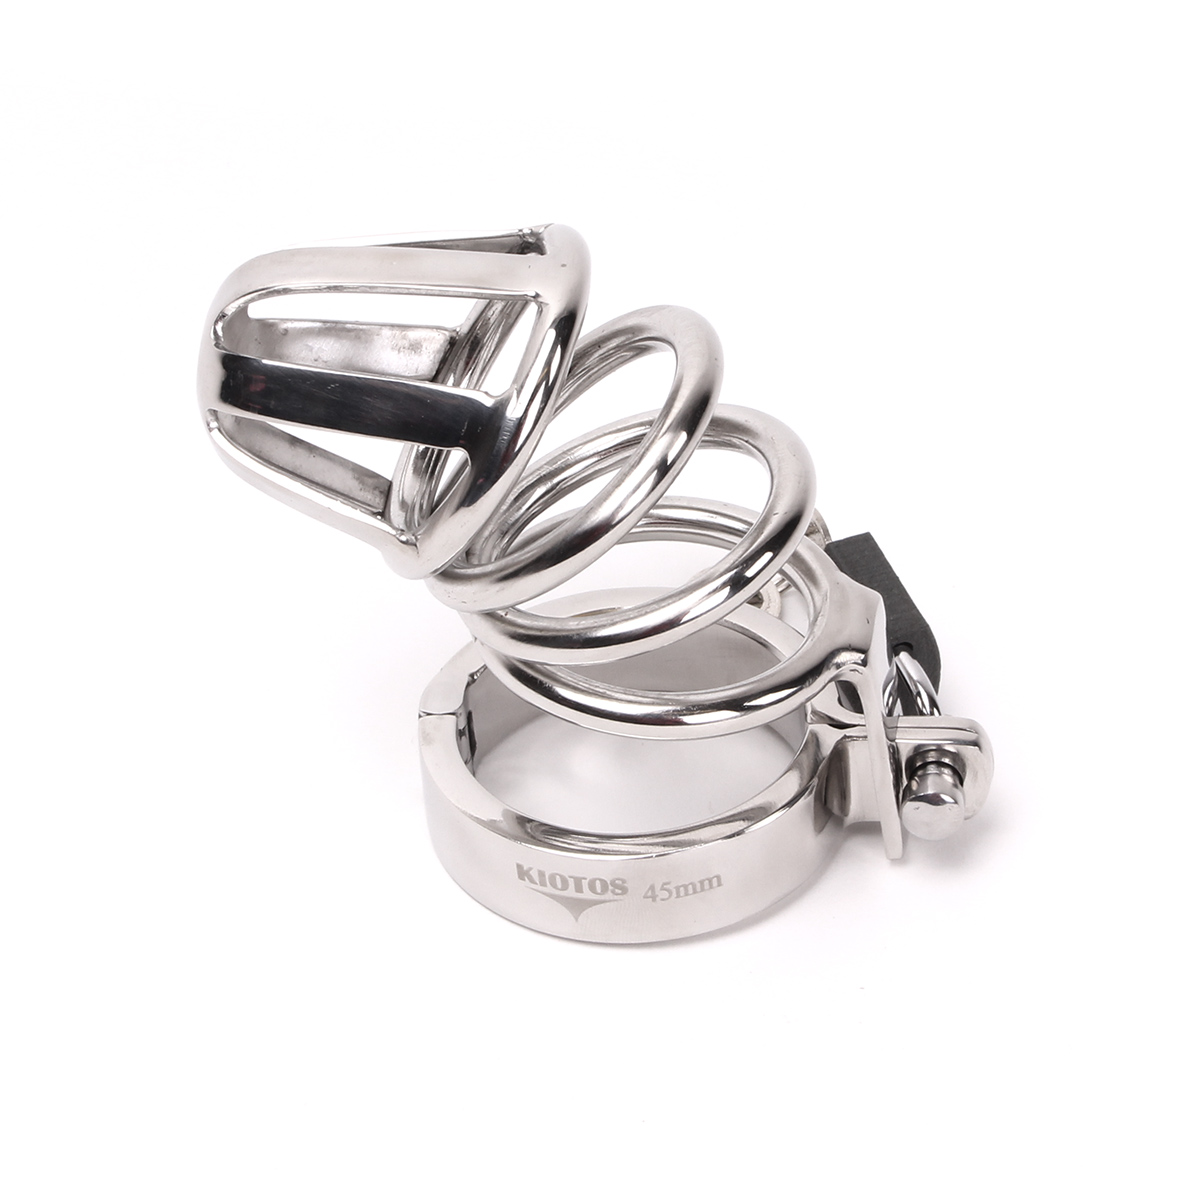 Chastity-Cage-Large-Steel-OPR-277031-1